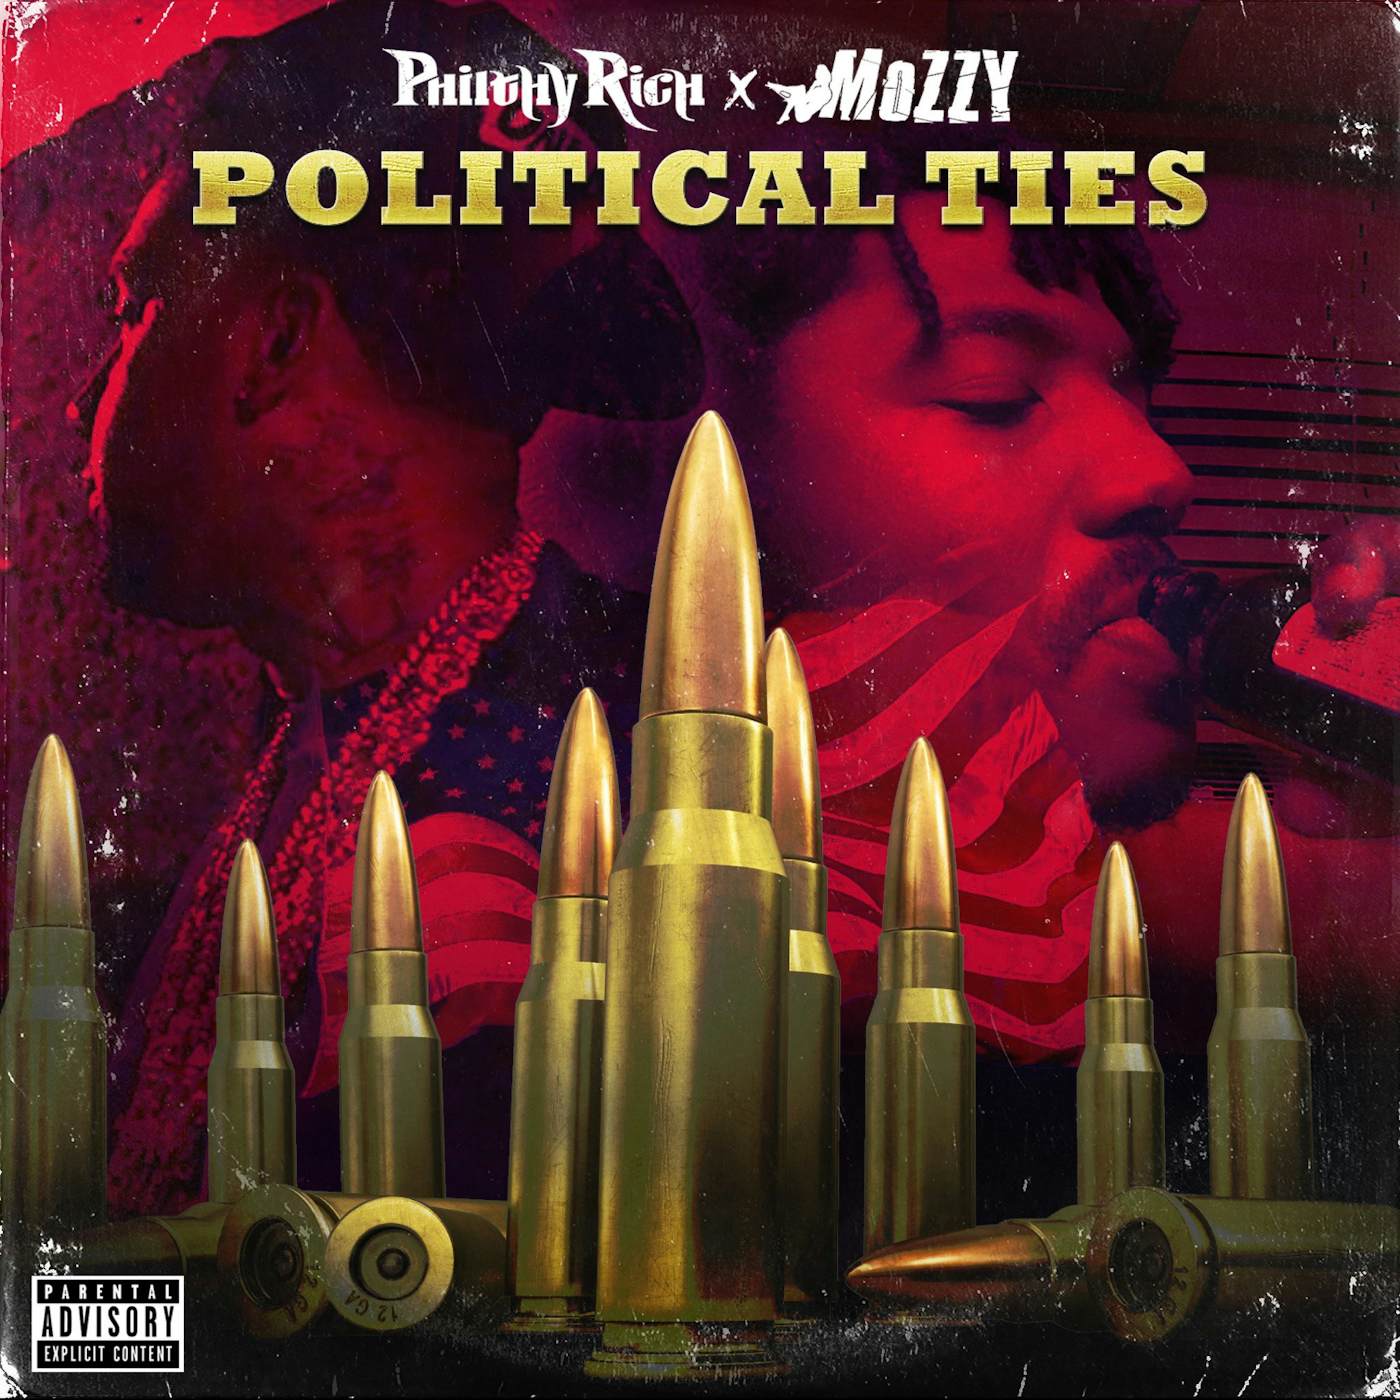 Philthy Rich & Mozzy - Political Ties CD